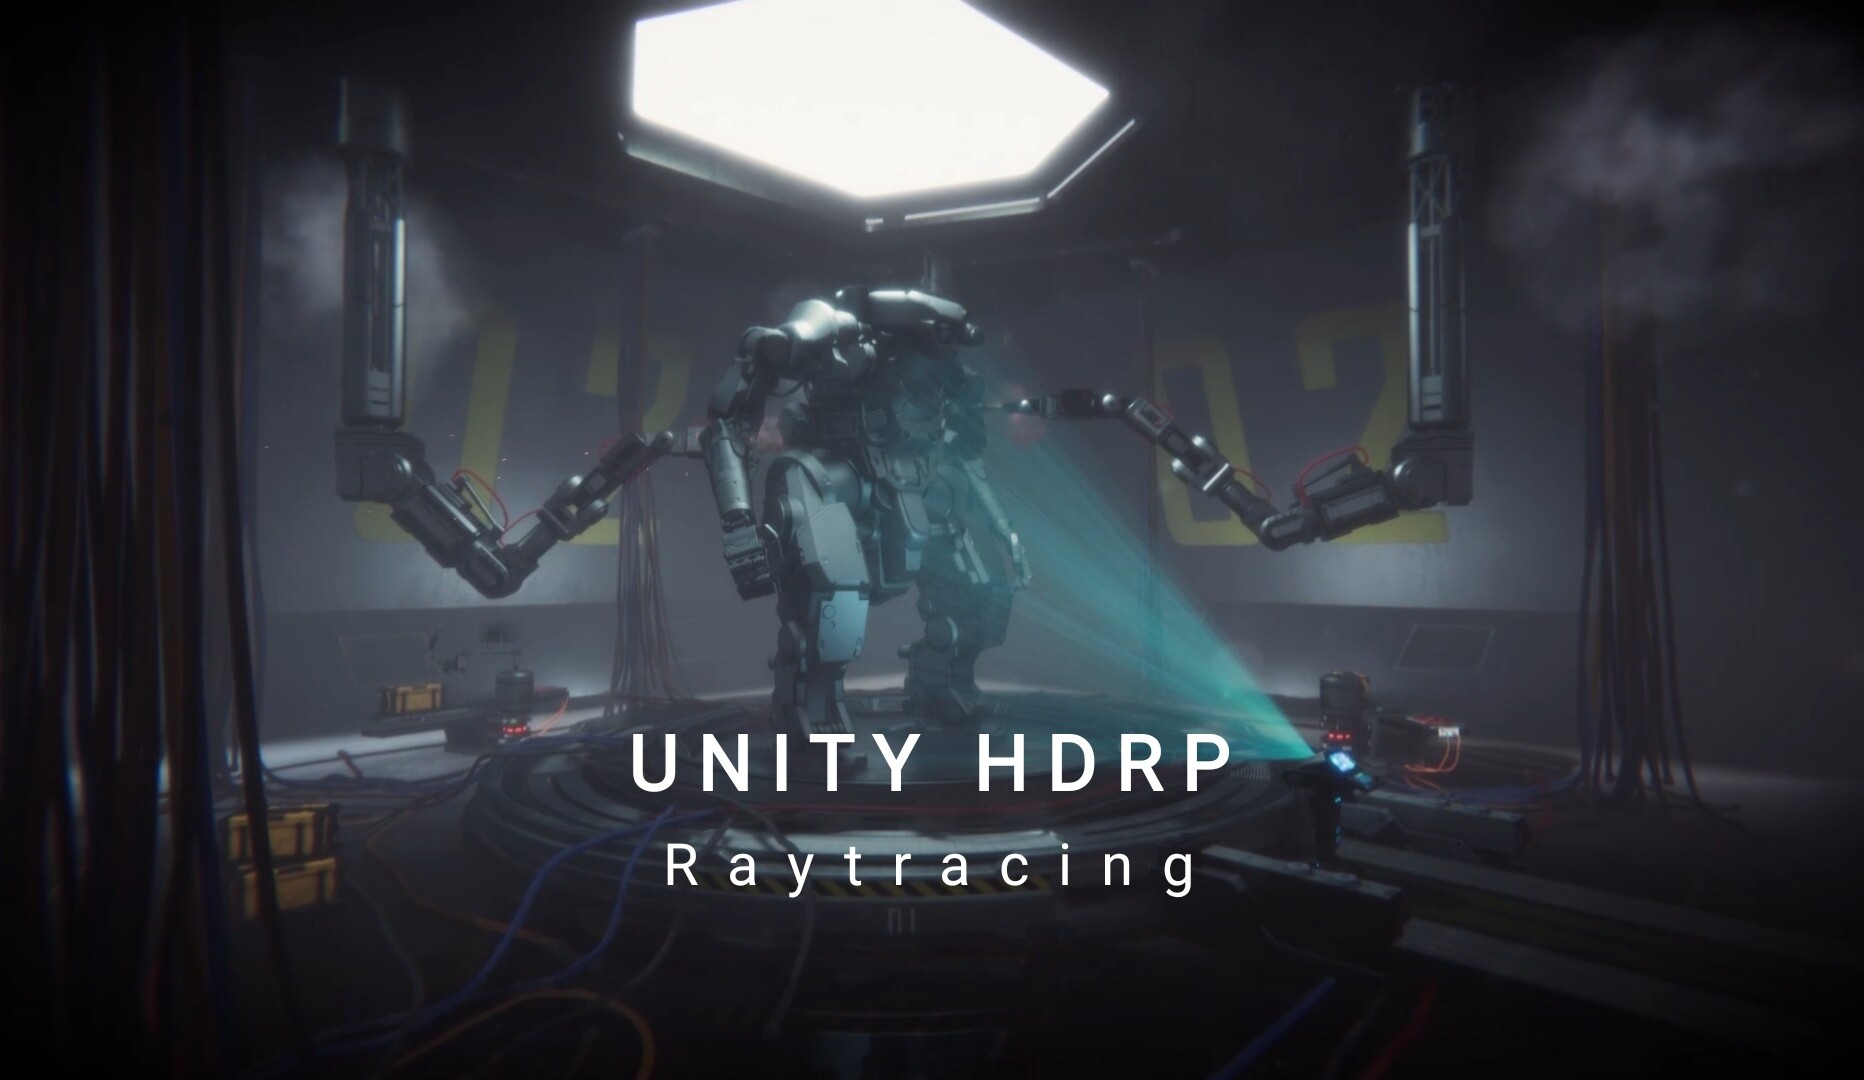 Unity connecting. Unity HDRP. Mech Factory. HDRP Unity т. HDRP vs URP Unity.